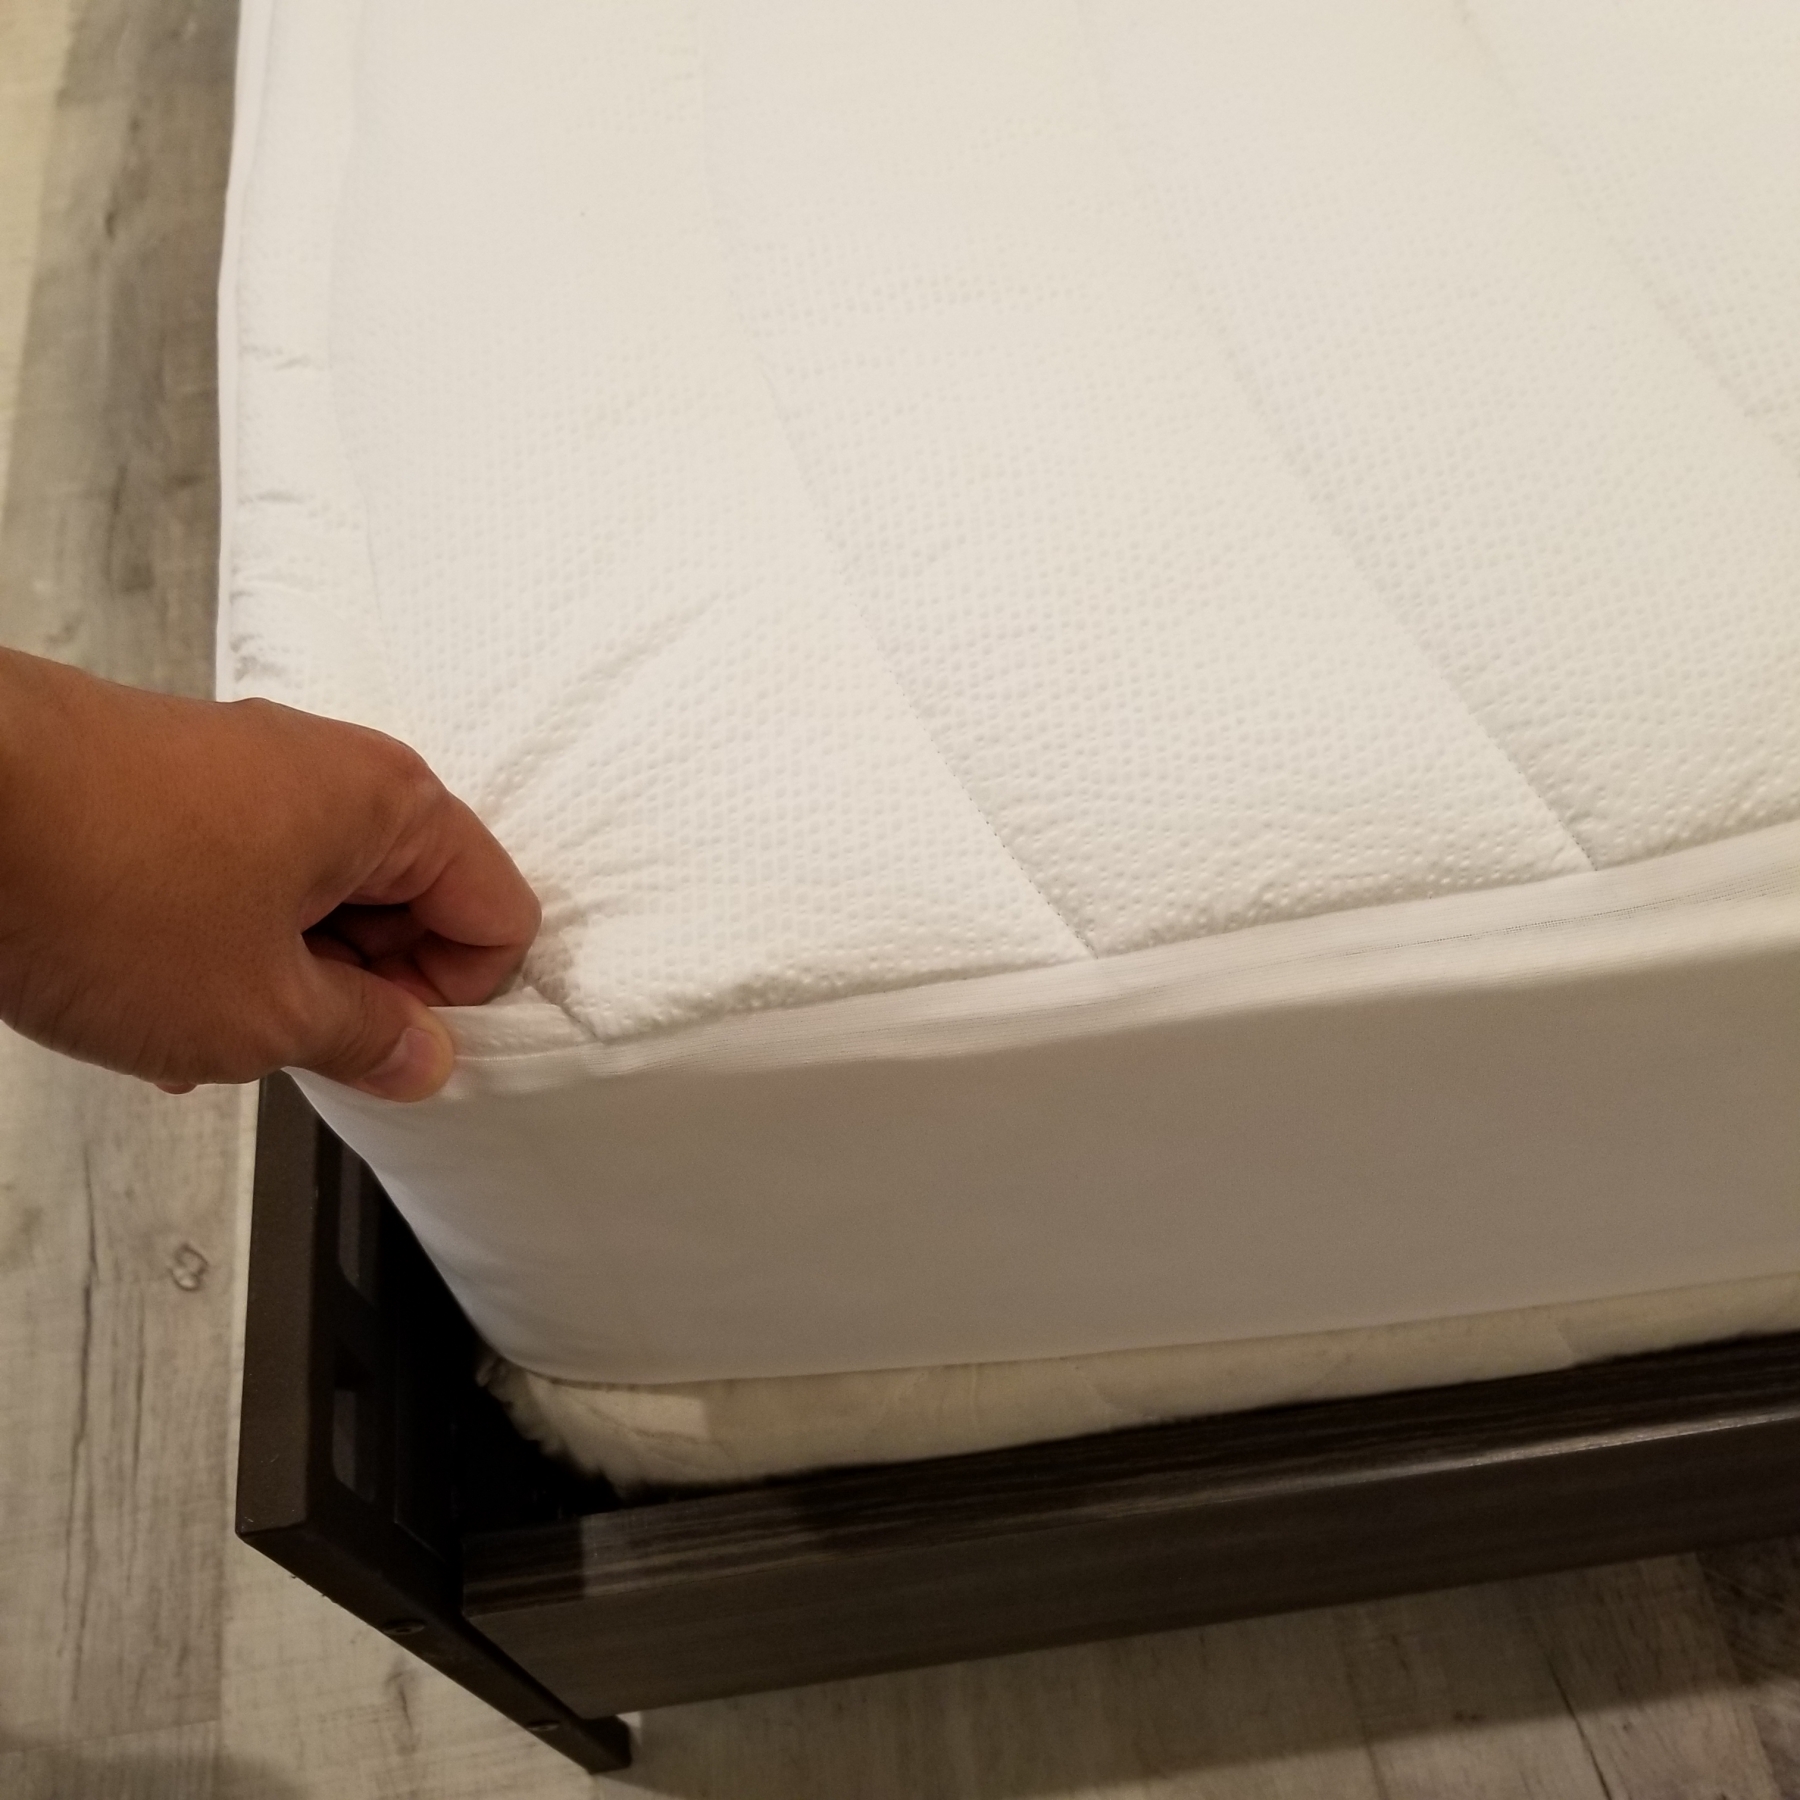 This bed pad is amazing!  High Quality